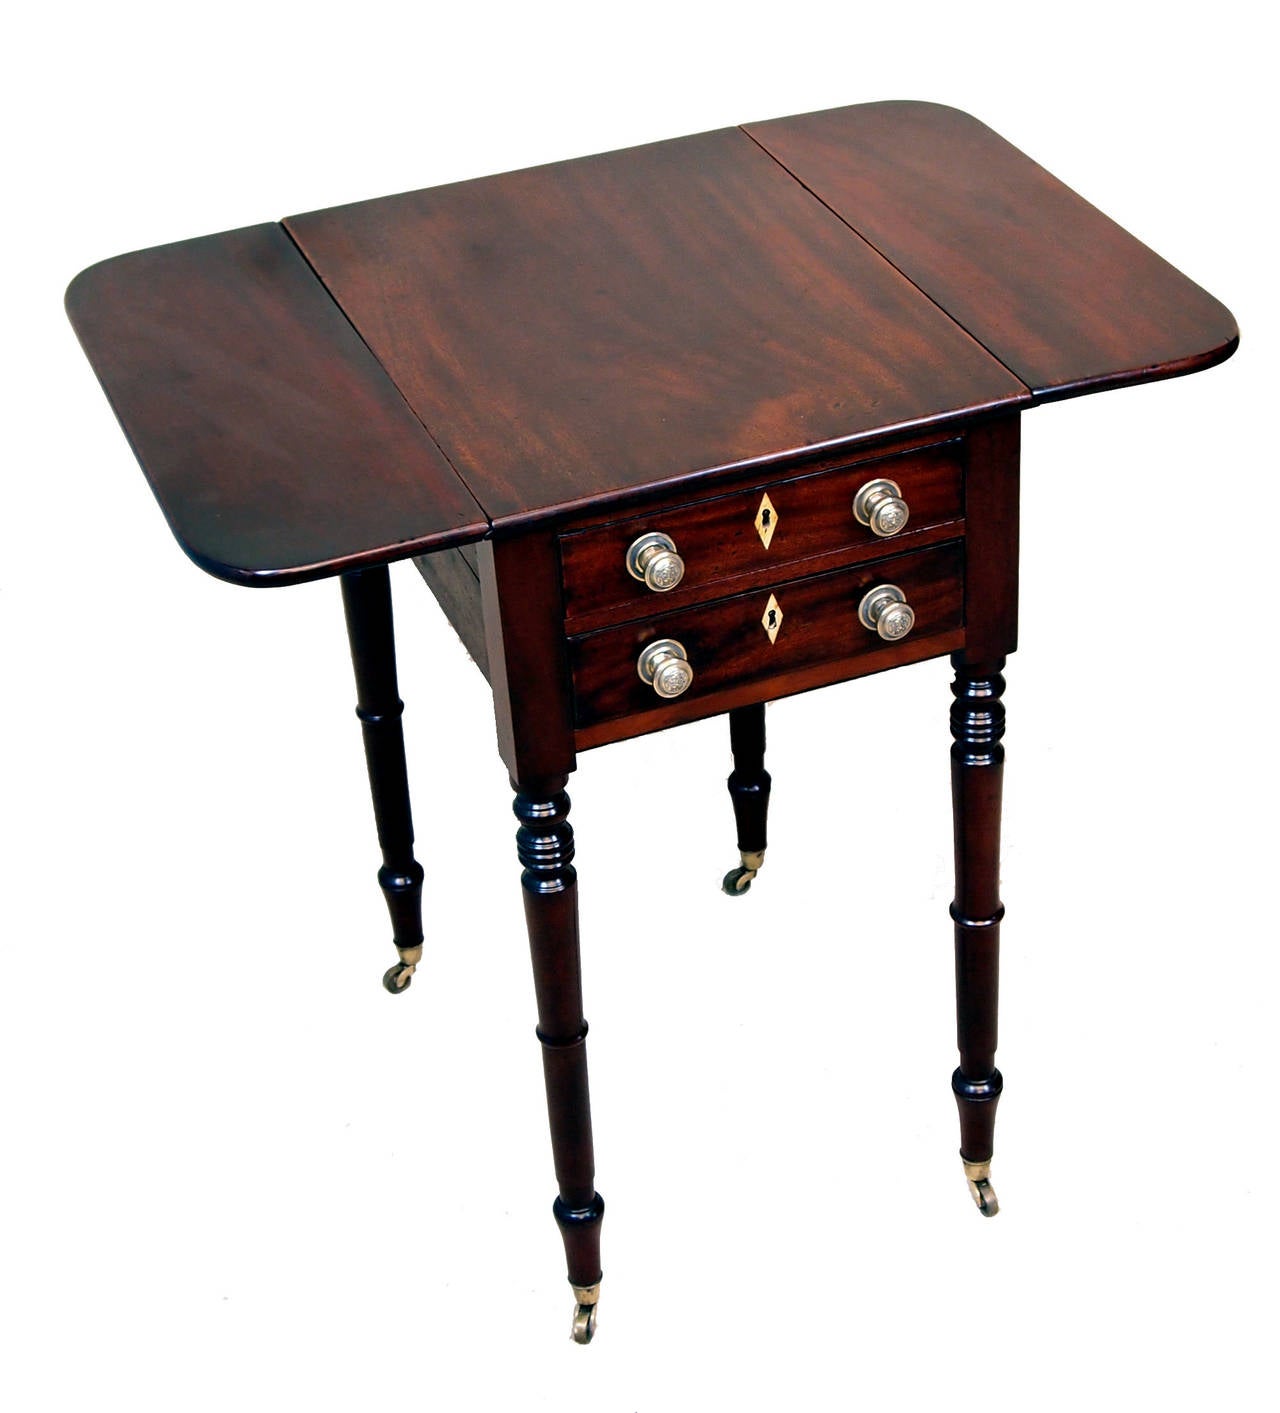 A Regency Mahogany Baby Pembroke Table Having Very 
Well Figured Top With Two Flaps Above Two Frieze Drawers 
Opposed By Two Dummy Drawers Raised On Elegant 
Turned Legs